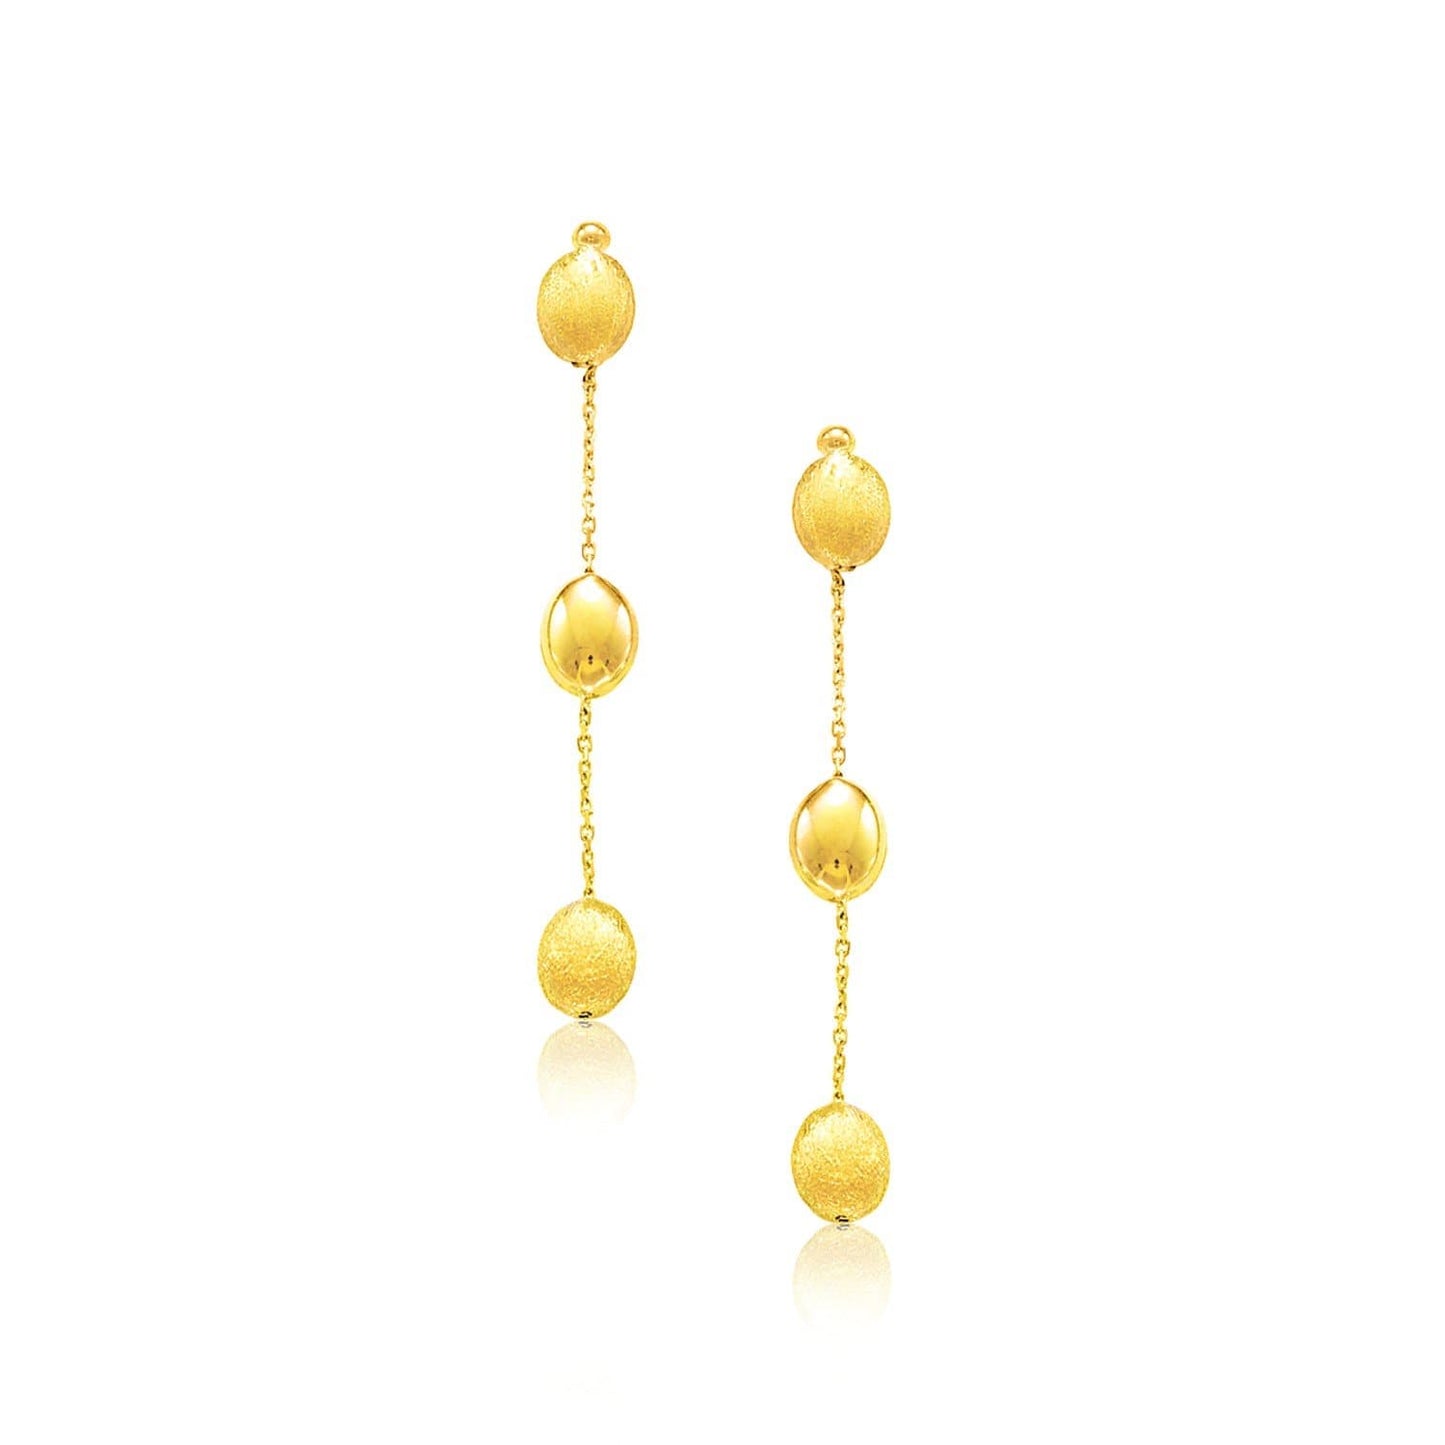 14k Yellow Gold Textured and Shiny Pebble Dangle Earrings